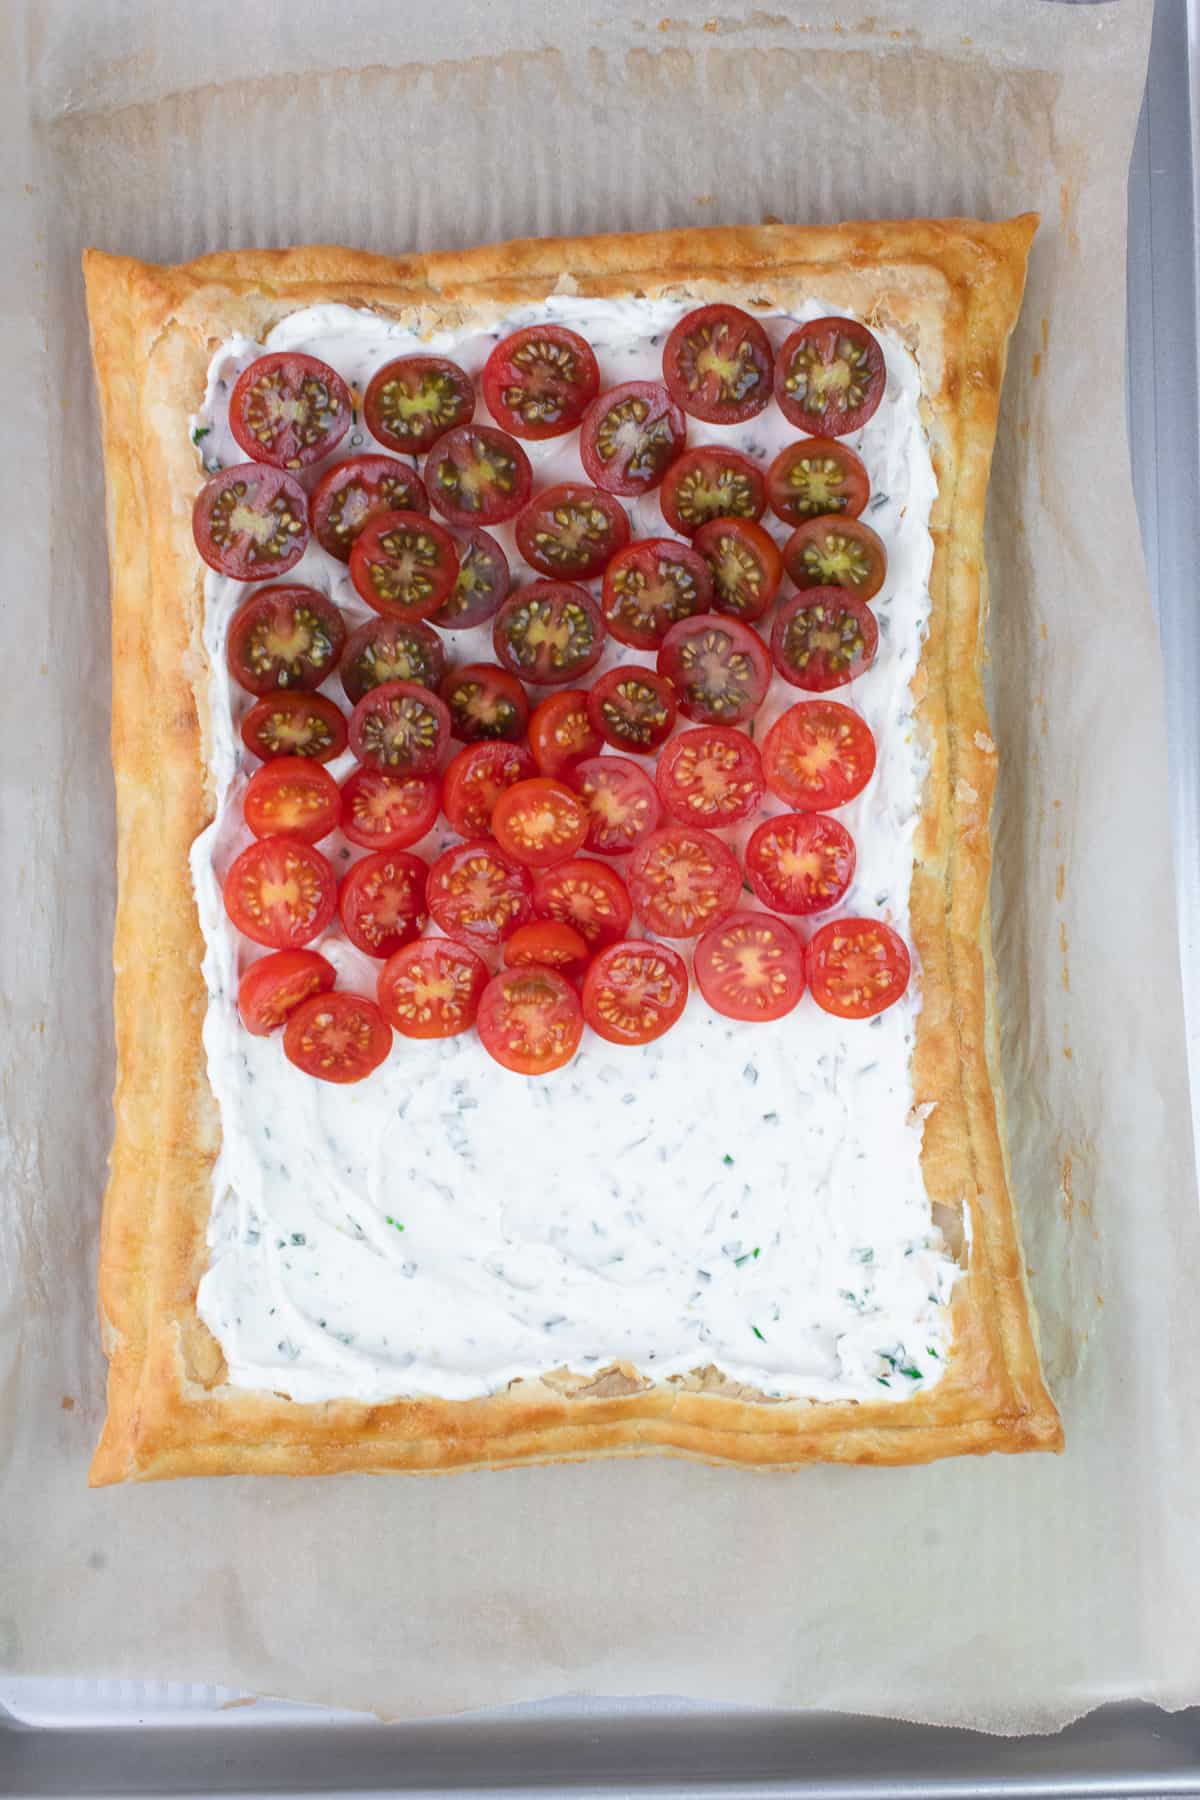 Golden brown puff pastry with a layer of herbed cream cheese and raw tomatoes